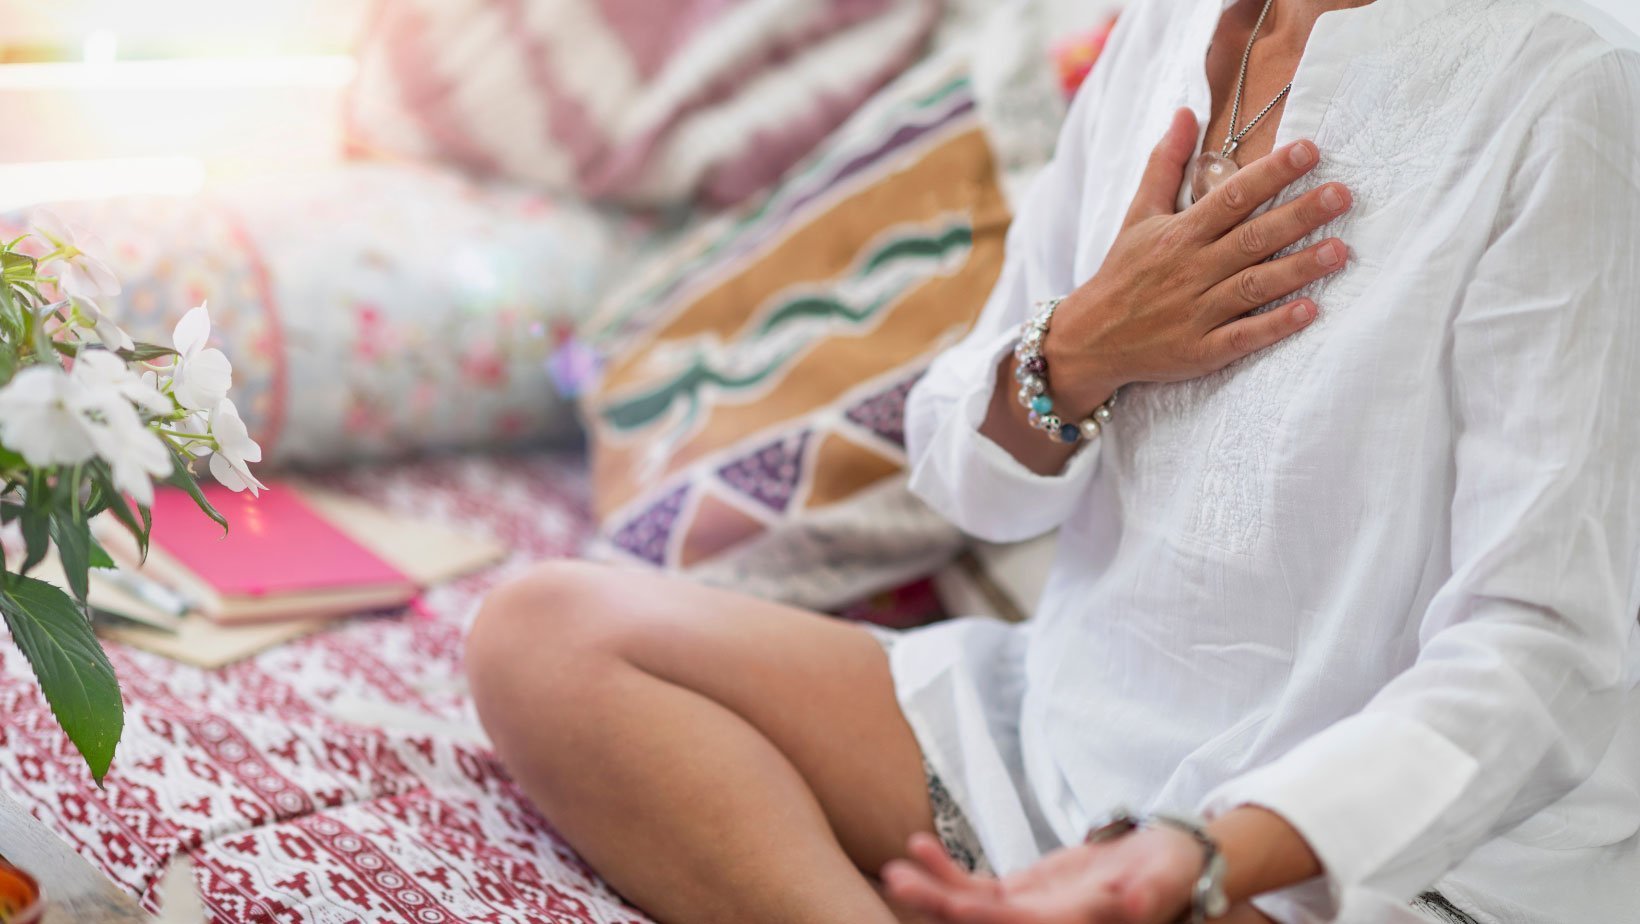 Woman meditating with her hand on her heart